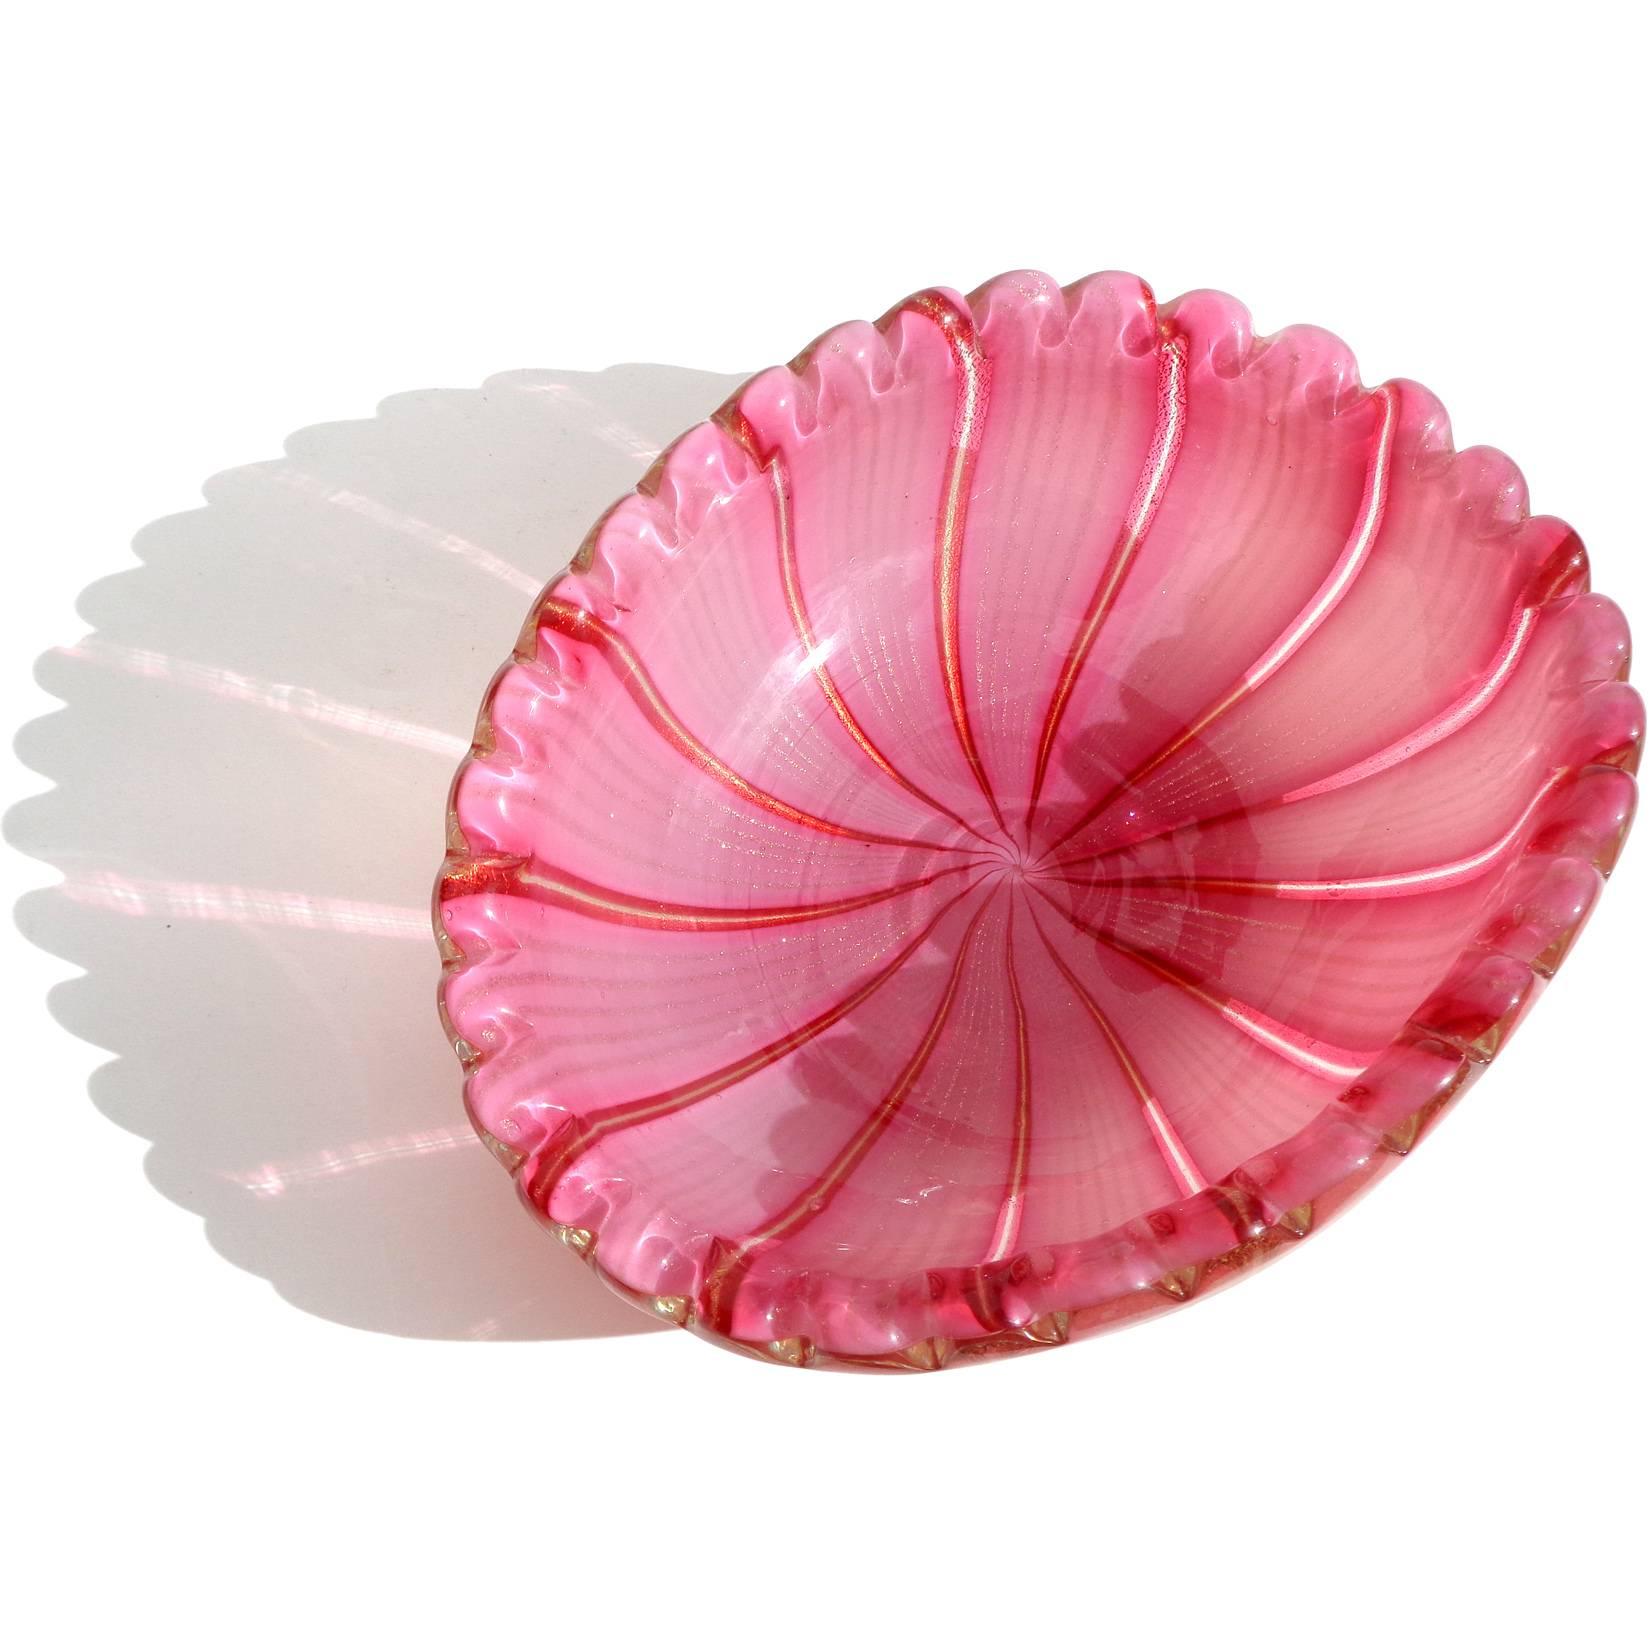 Gorgeous Murano hand blown pink, aventurine and gold flecks Italian art glass decorative bowl. Attributed to Dino Martens for Aureliano Toso. The bowl is made with large 